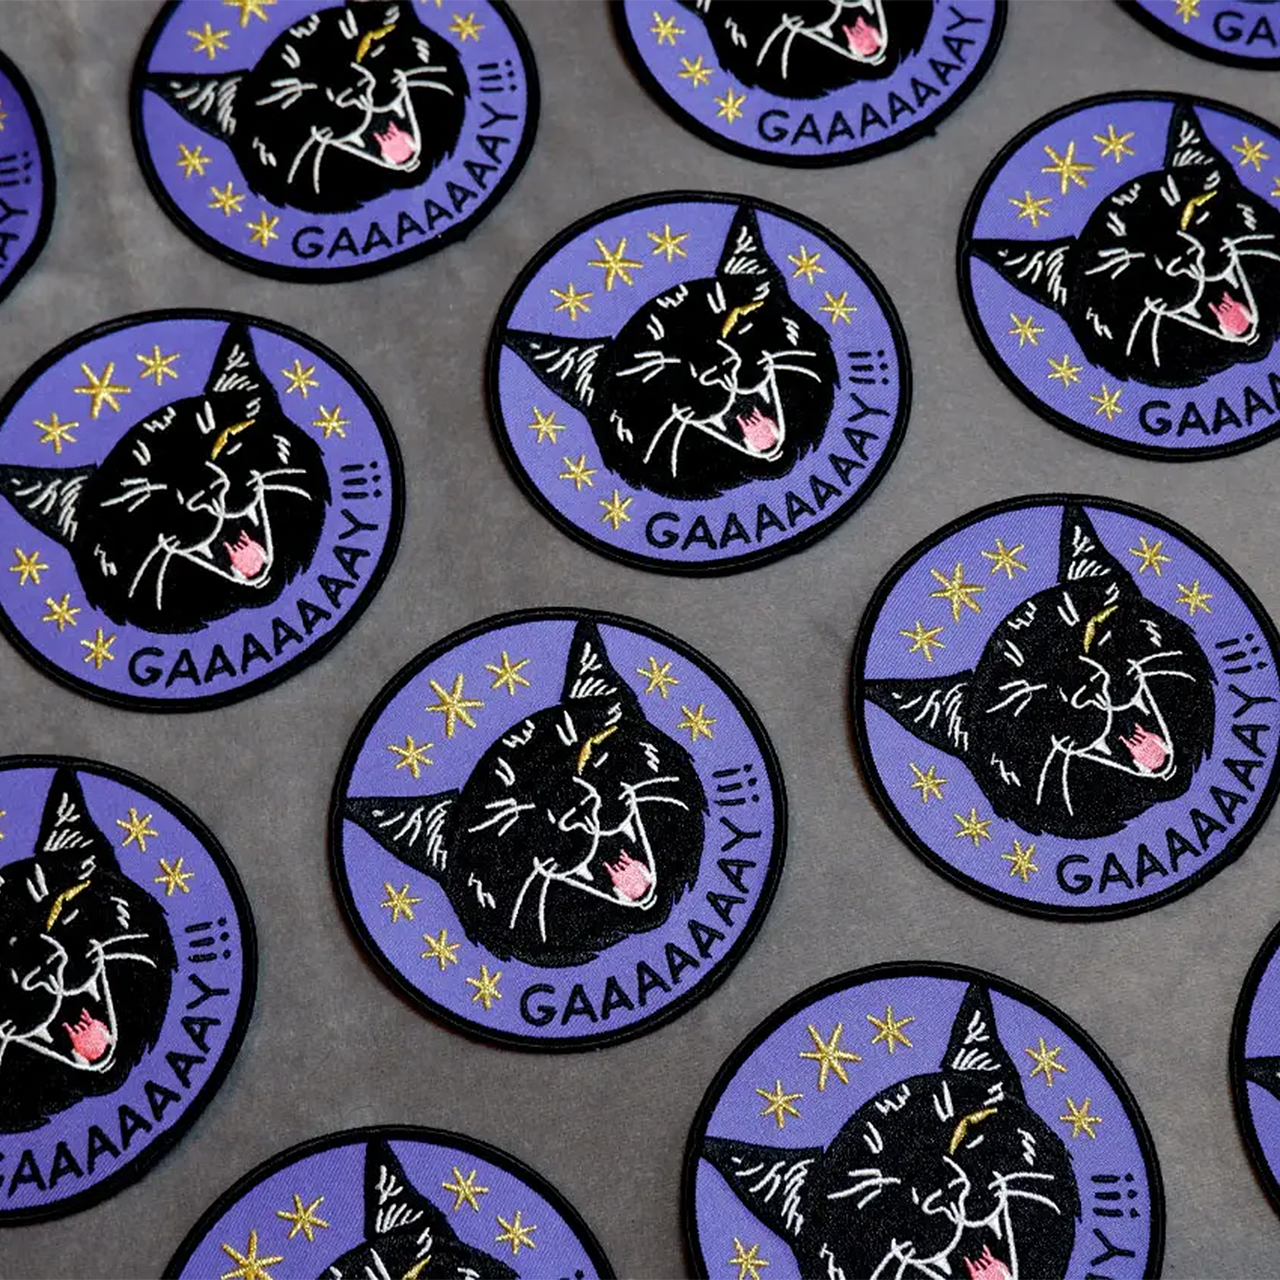 CAT COVEN GAAAAAAY! EMBROIDERED PATCH